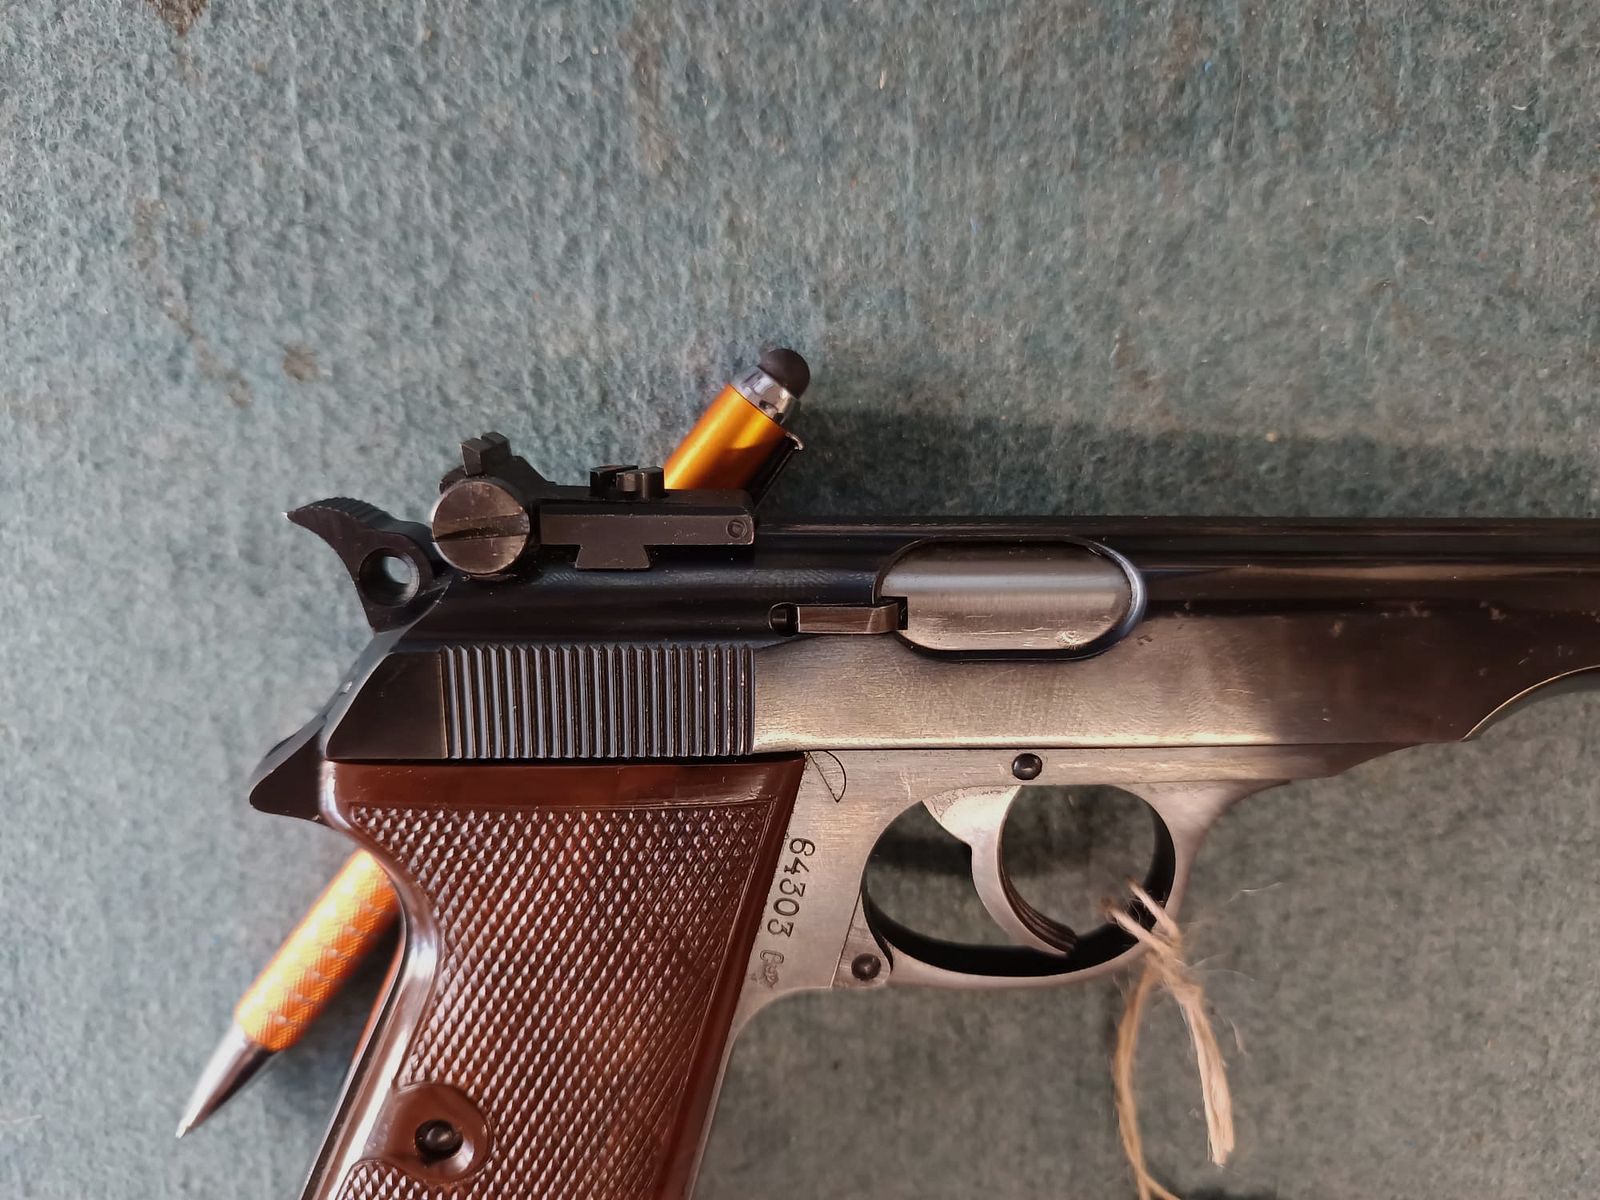 Pistole Walther PP Sport - C .22 lr. PPS Manurhin 